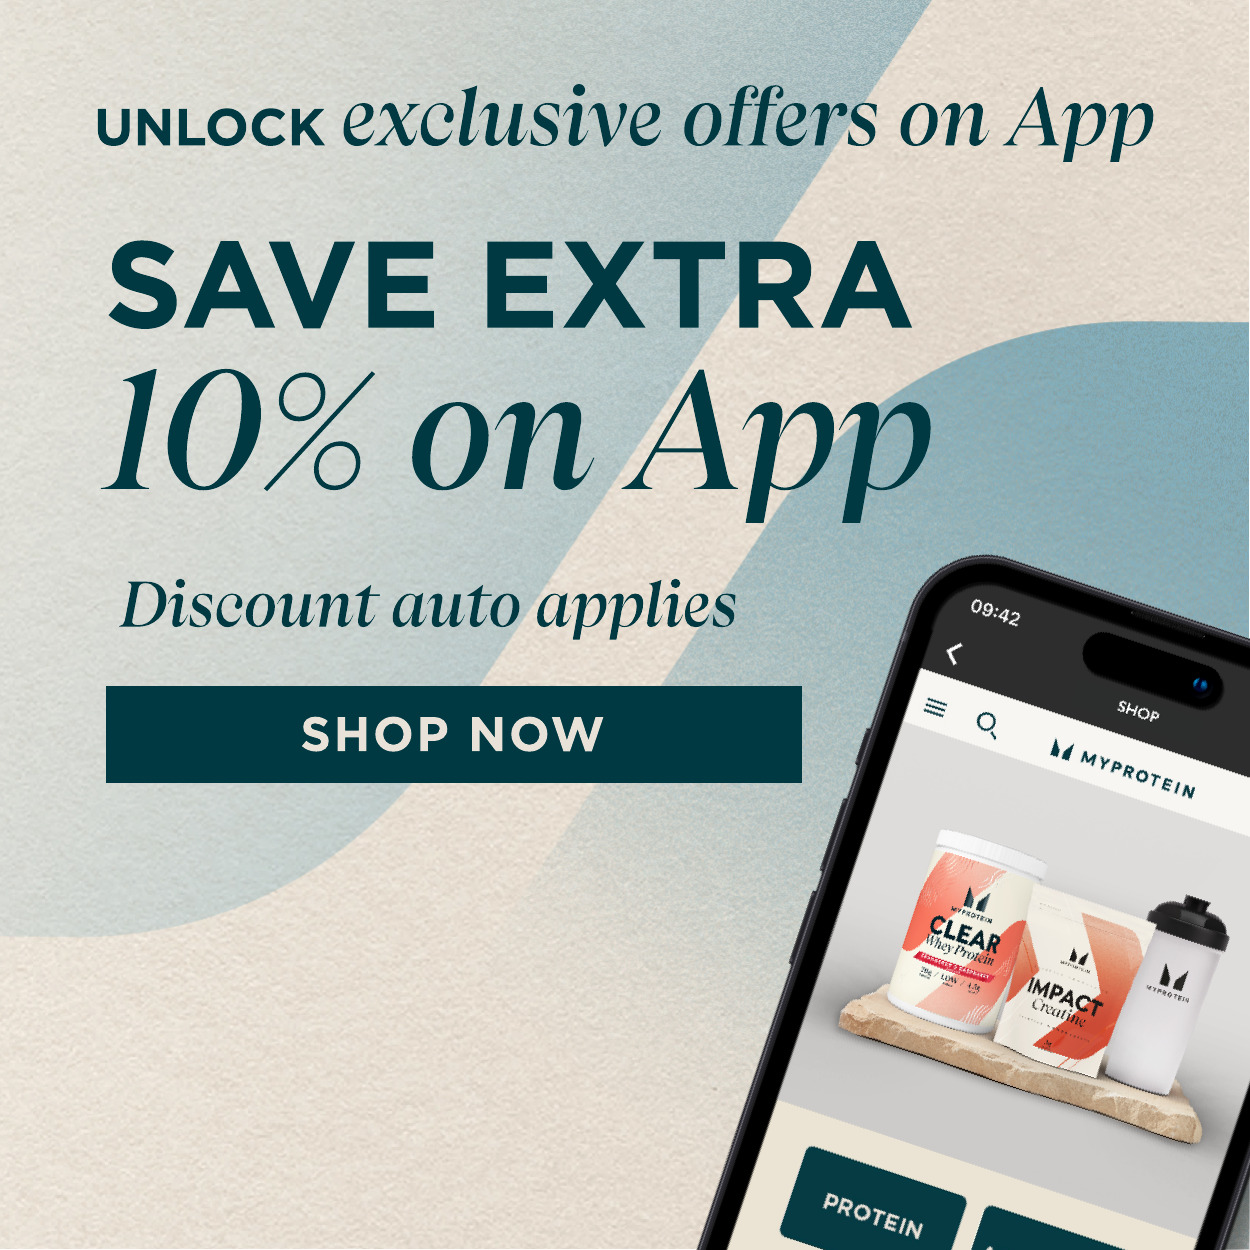 25% off almost everything + 10% extra on app